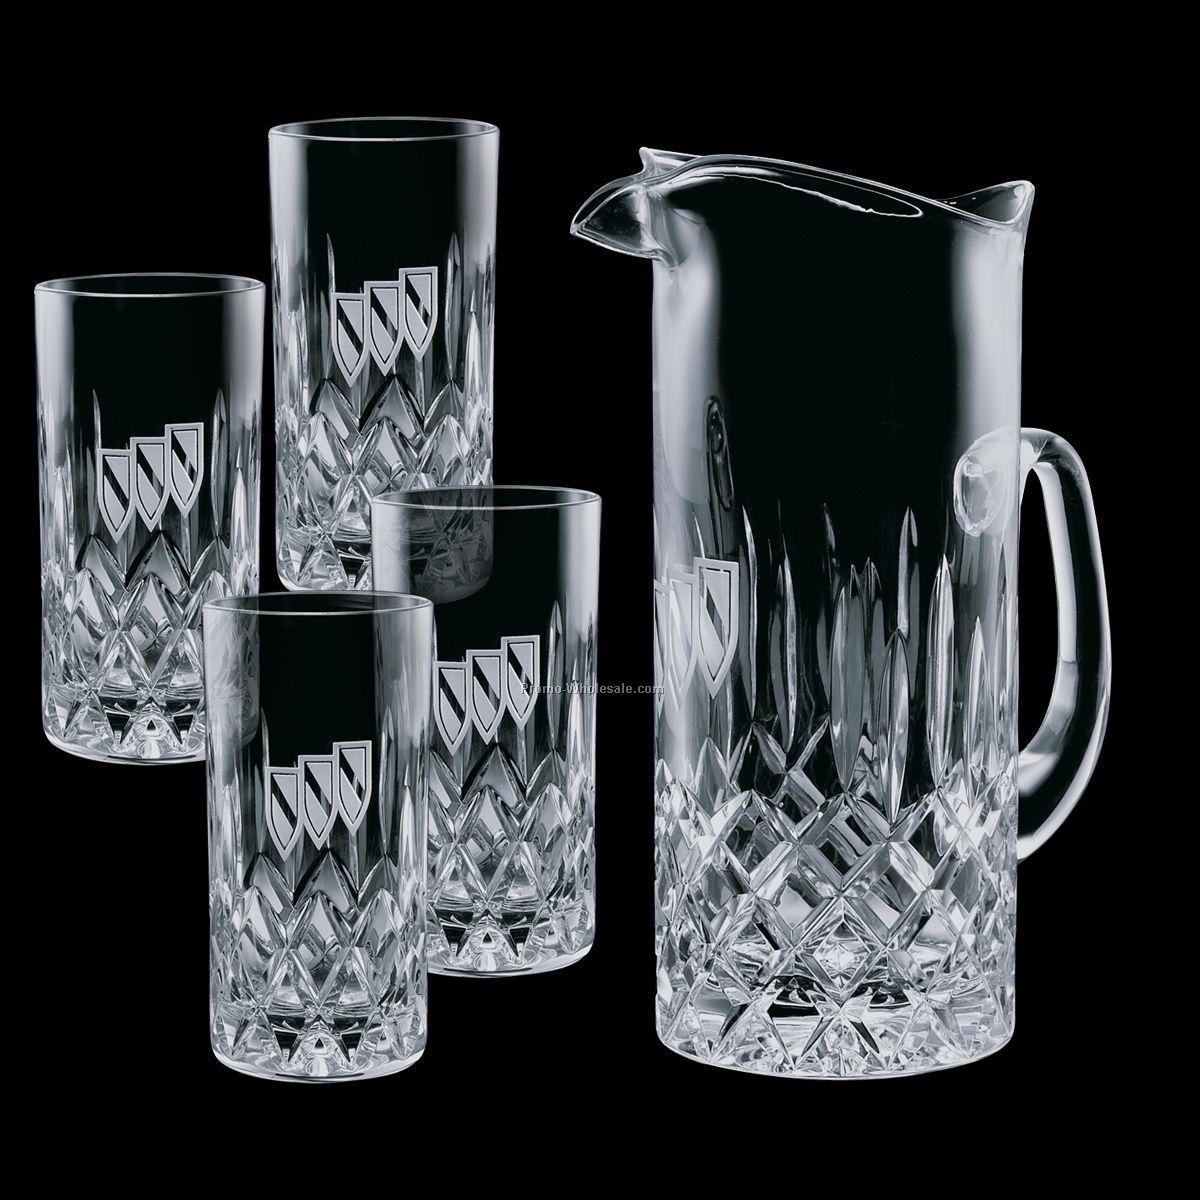 30 Oz. Crystal Denby Pitcher And 4 Hiball Glasses